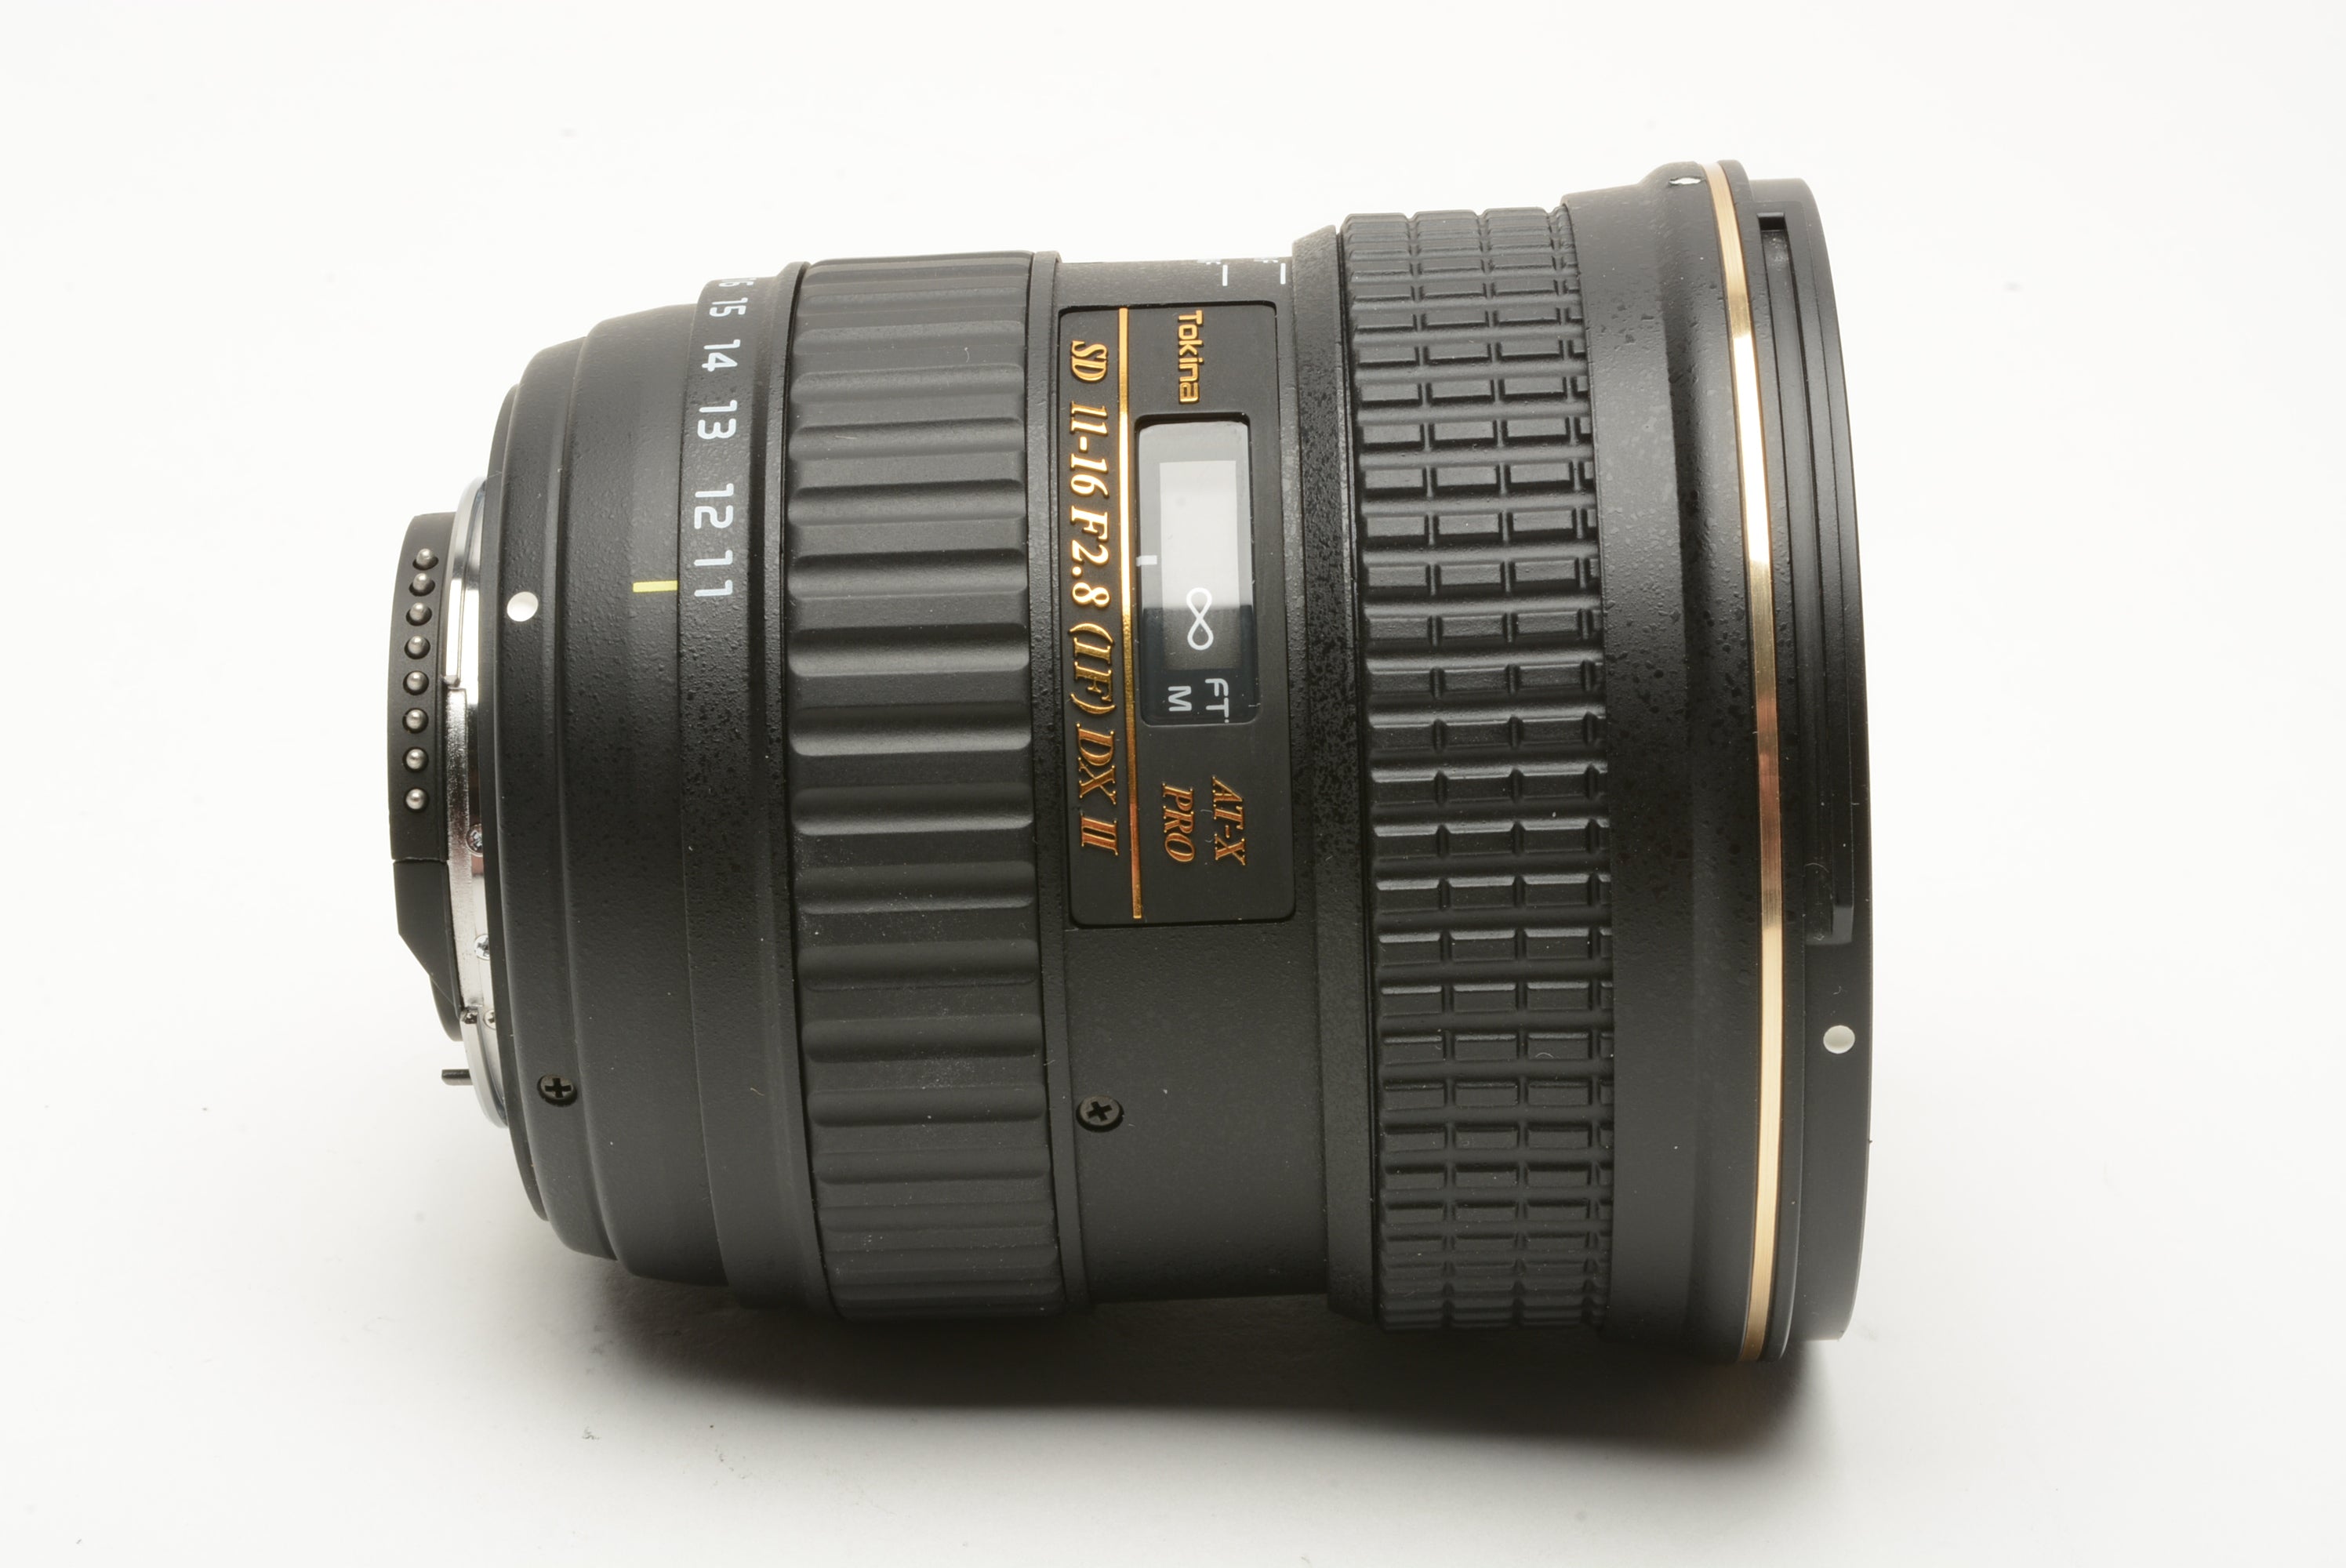 Tokina SD 11-16mm f2.8 IF DX II ATX Pro wide angle zoom lens